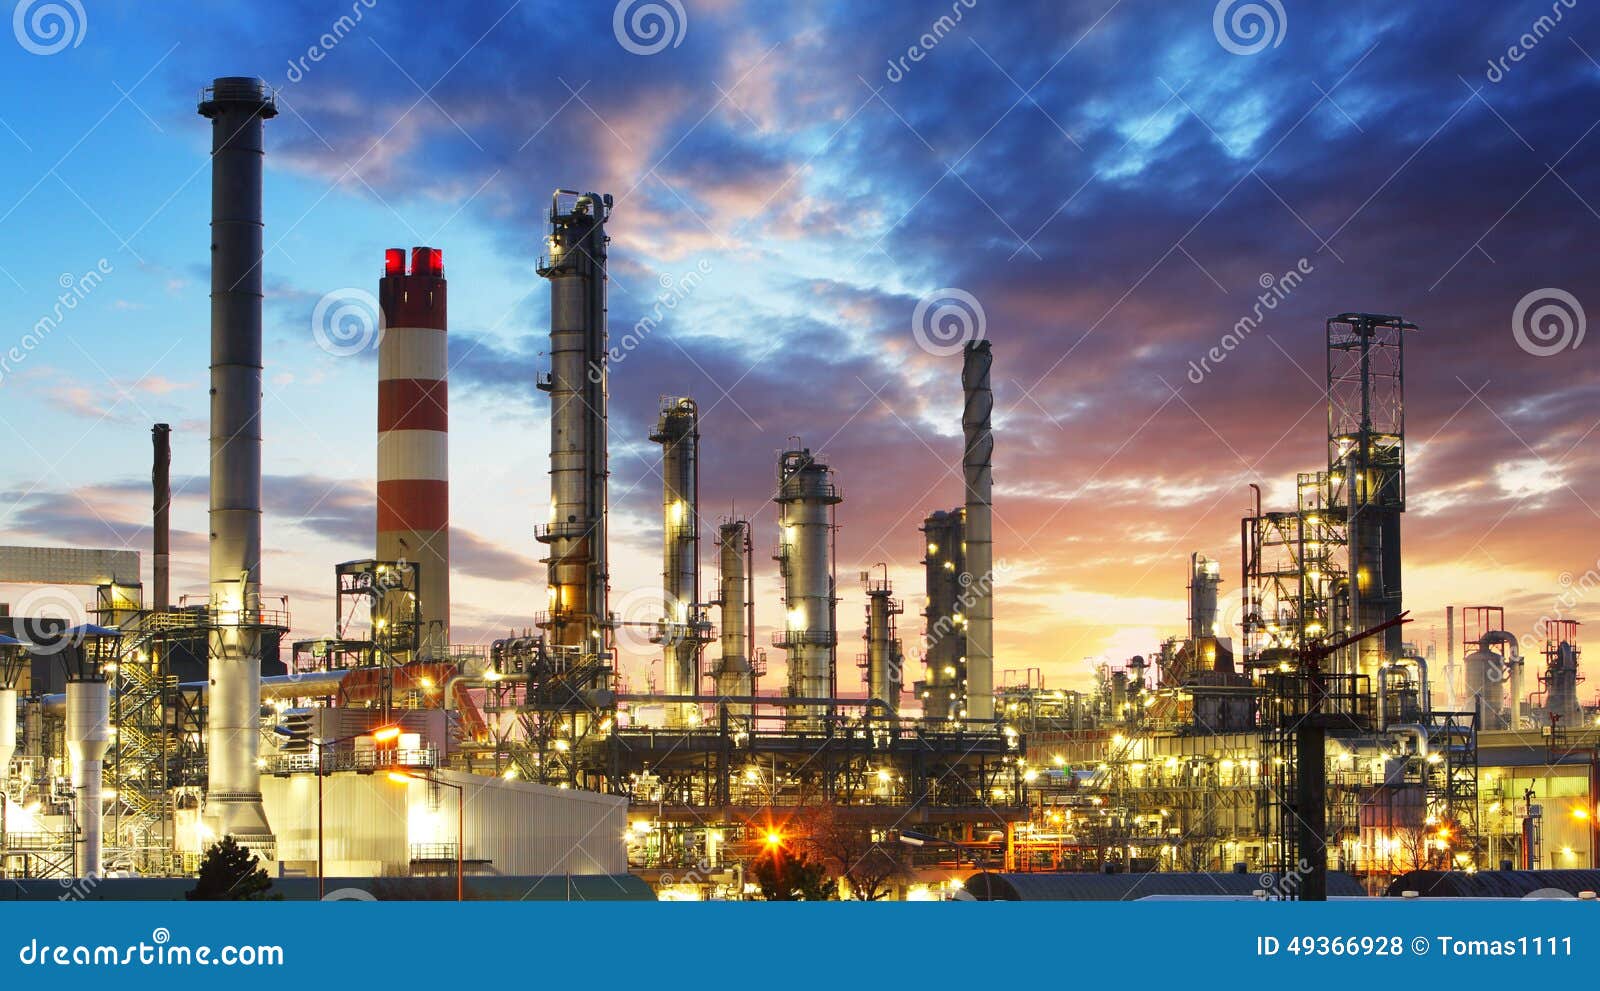 oil and gas refinery, power industry